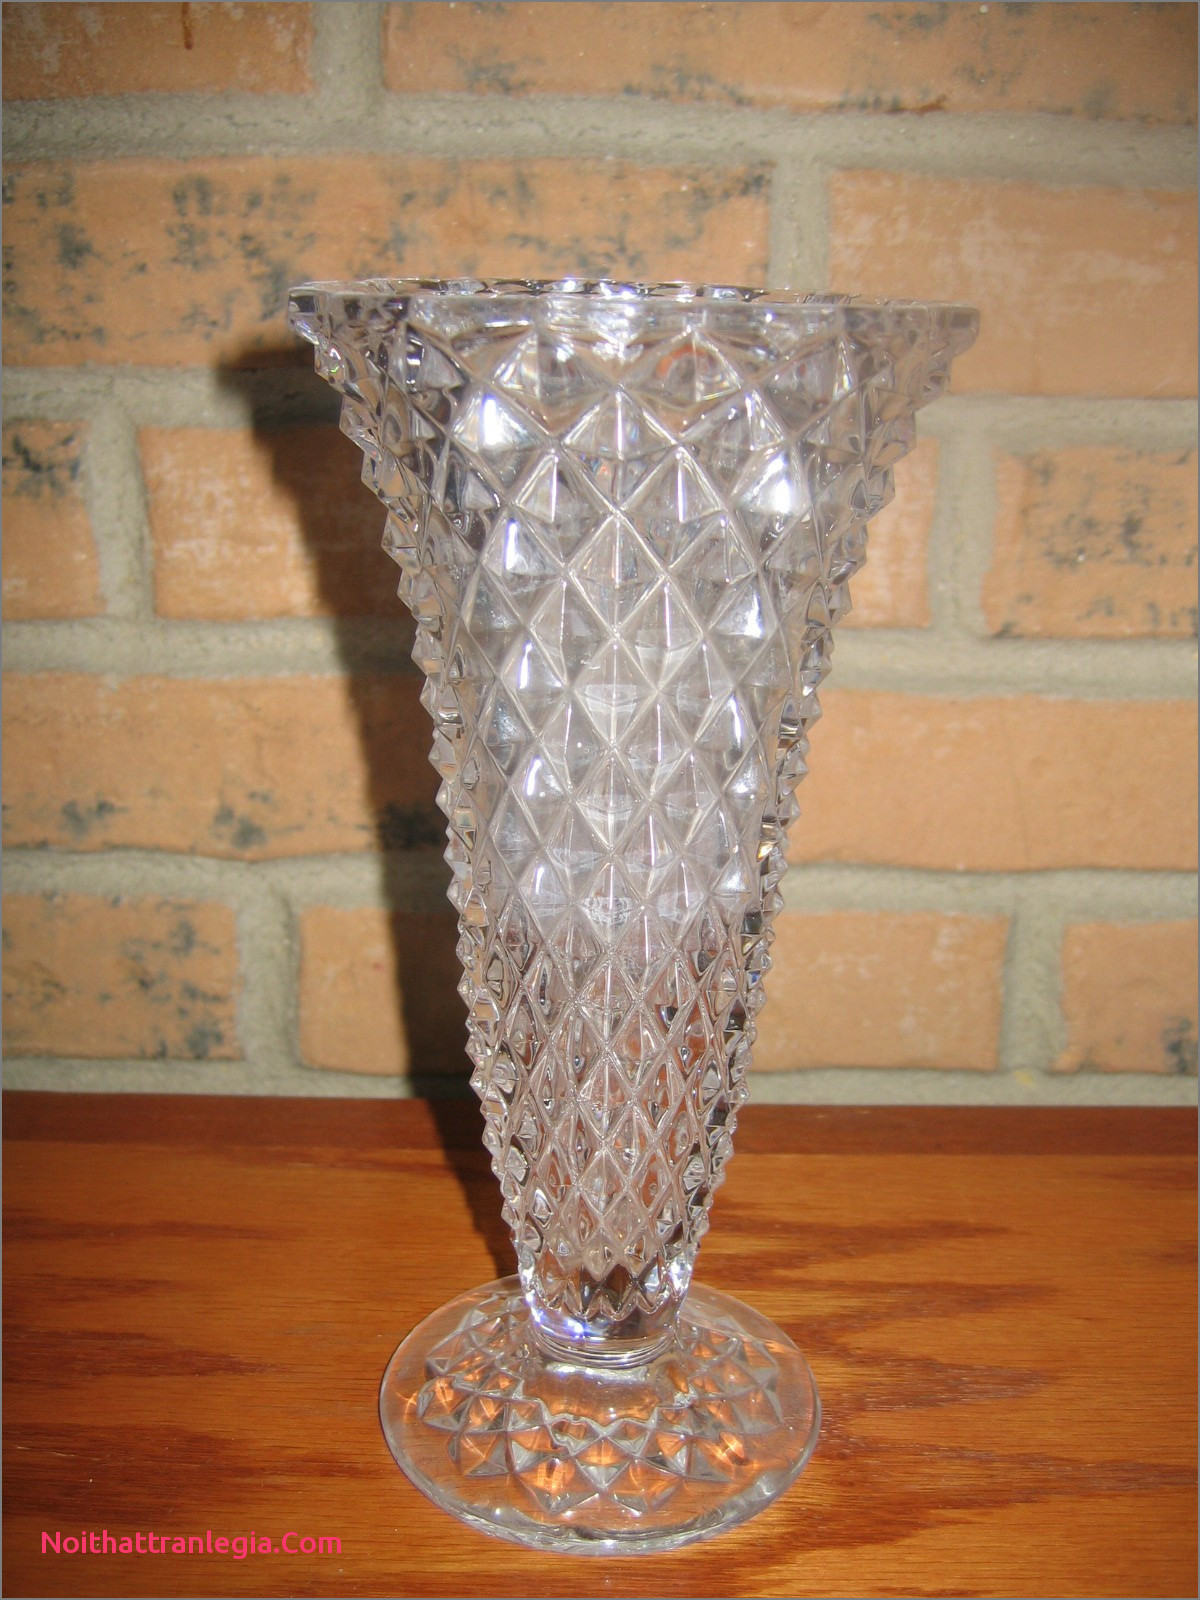 14 Perfect Mercury Glass Footed Vase 2024 free download mercury glass footed vase of 20 cut glass antique vase noithattranlegia vases design with regard to glass vase decoration ideas vases antique crystal 2 gorgeous edwardian cut lead glass